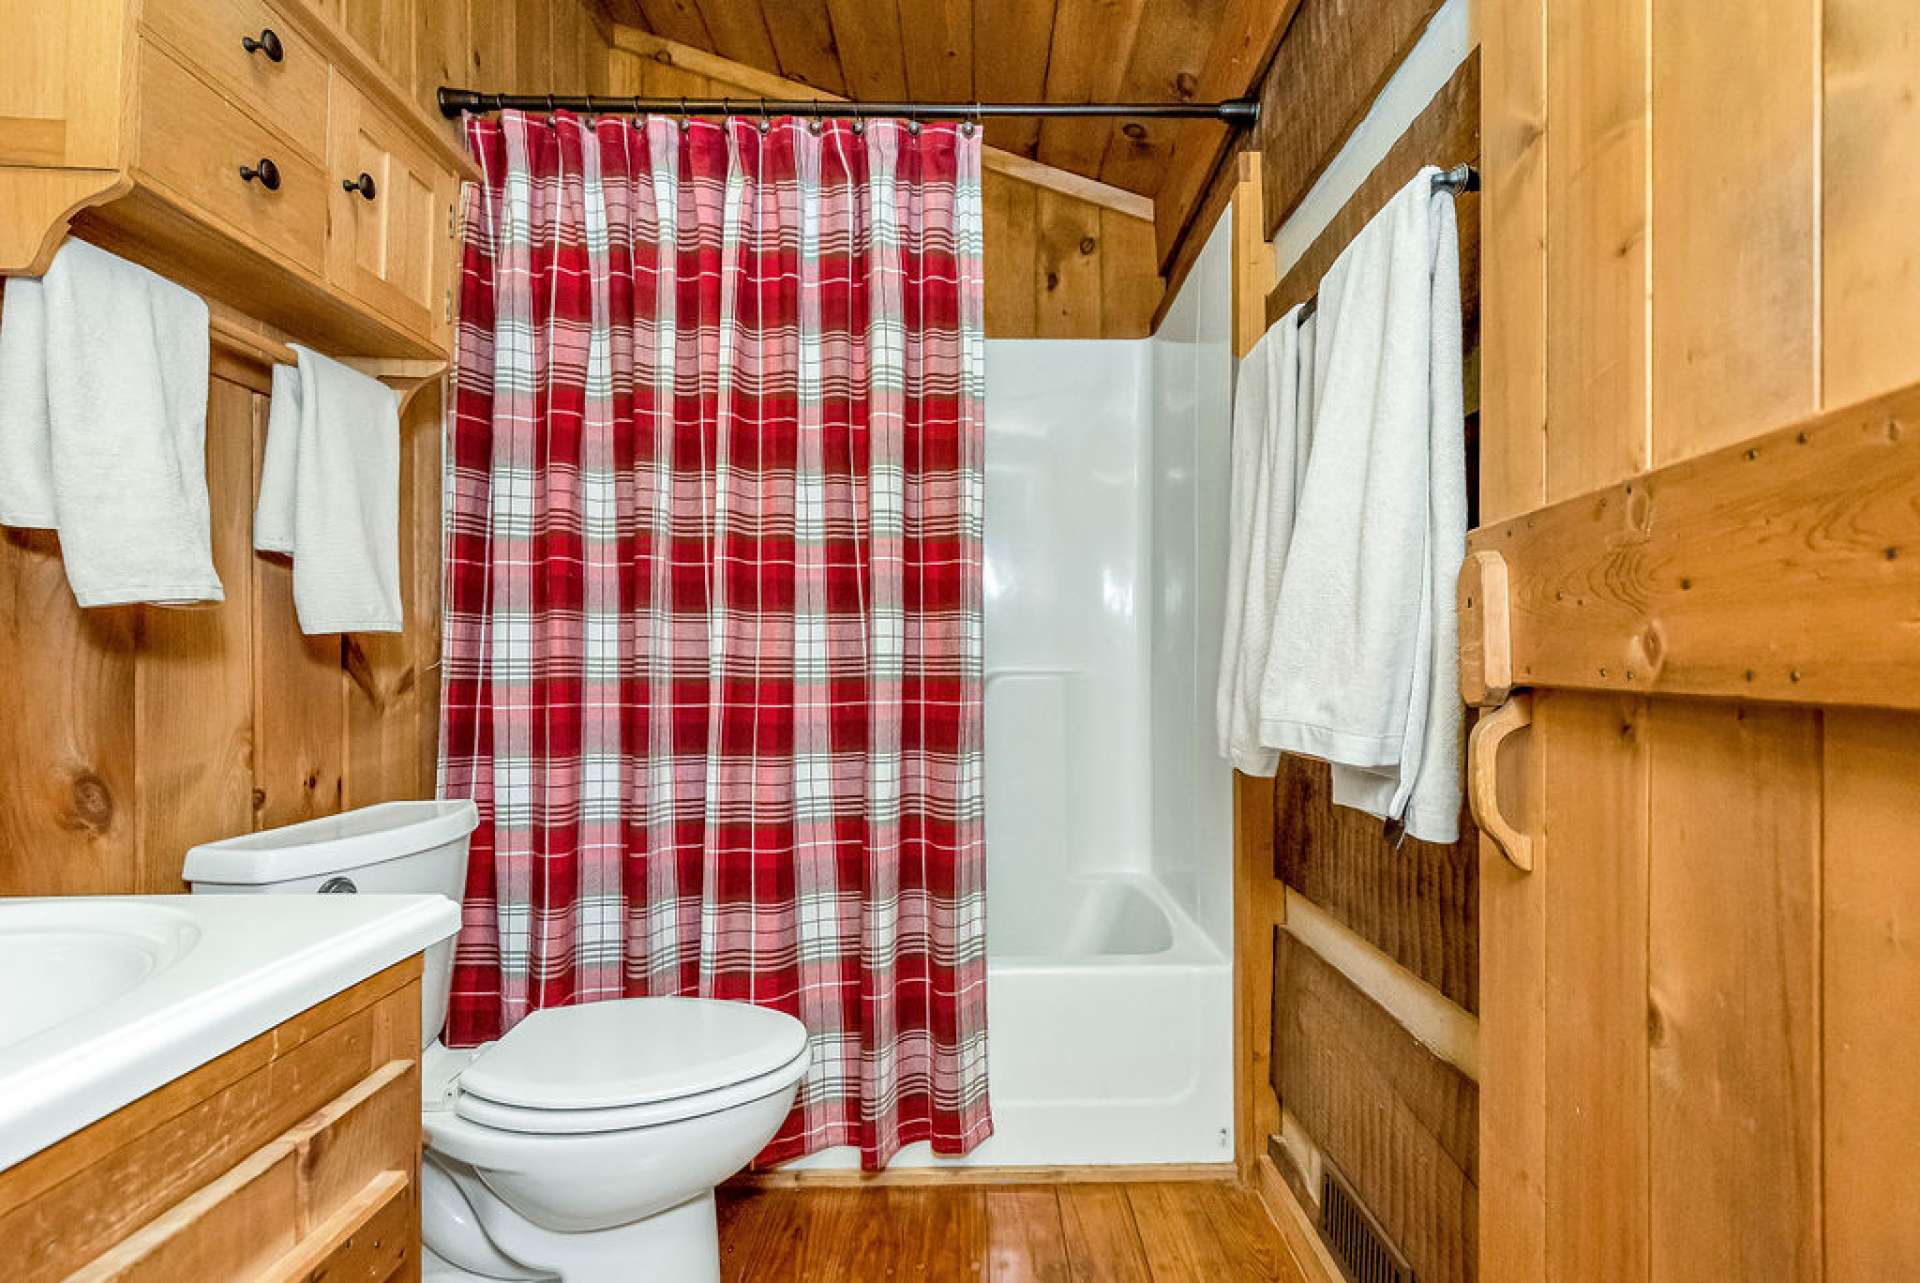 The second full guest bath located in the loft.